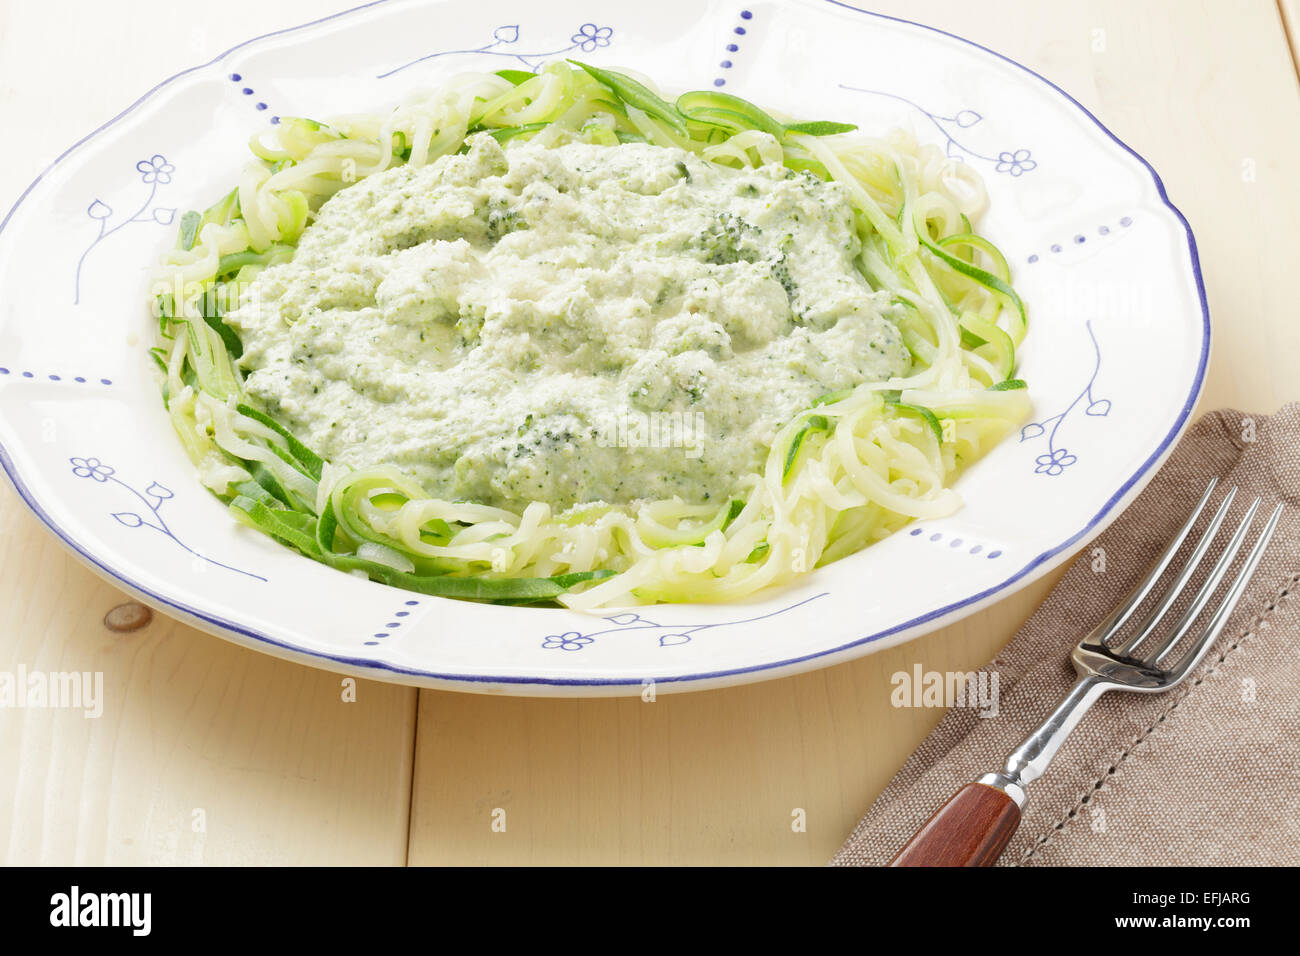 Courgetti or zoodles with a broccoli sauce Stock Photo